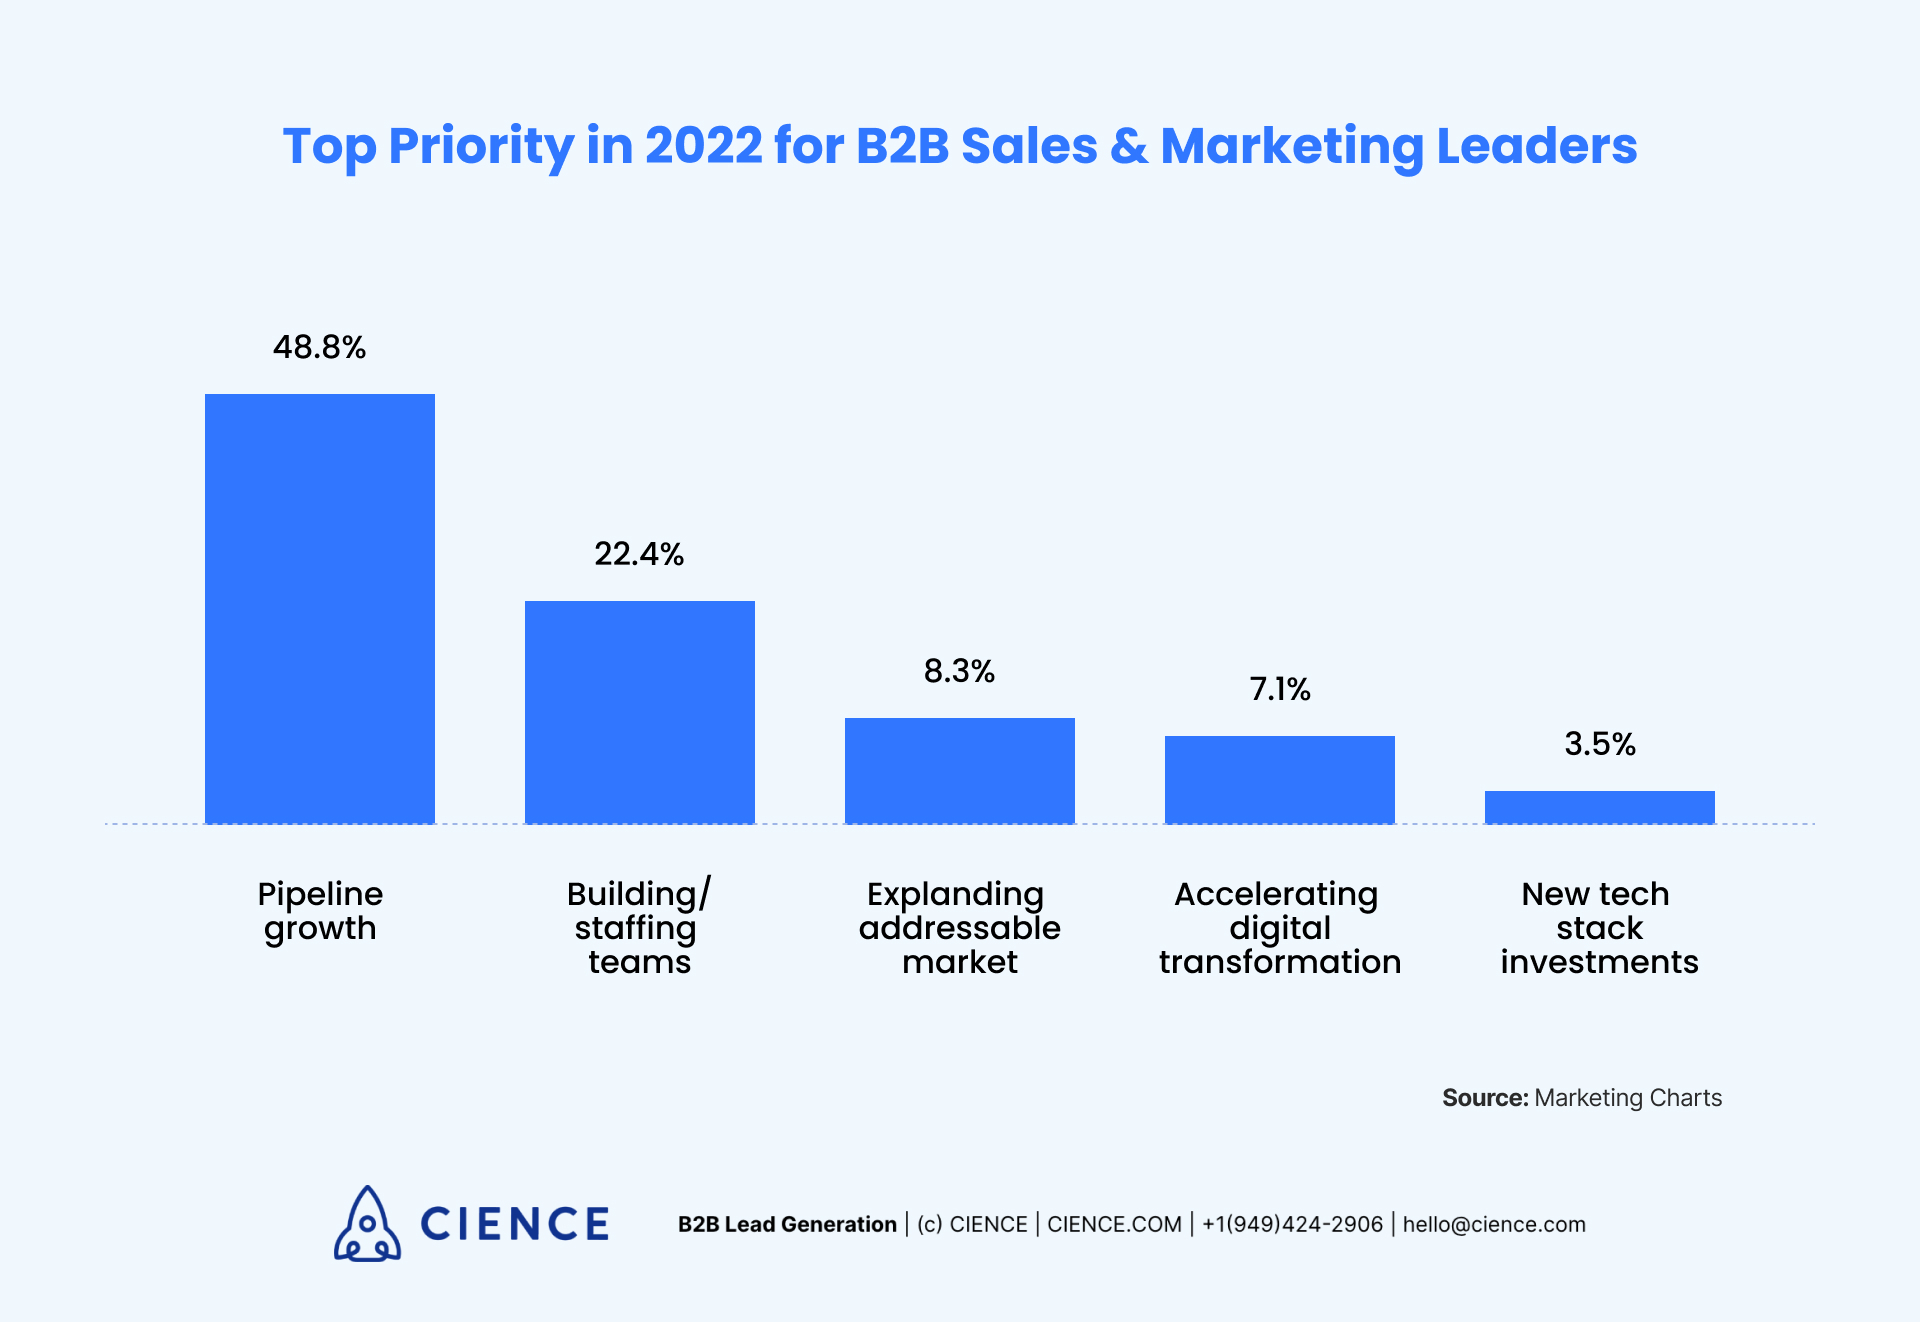 Top priority in 2022 for B2B sales and marketing leaders